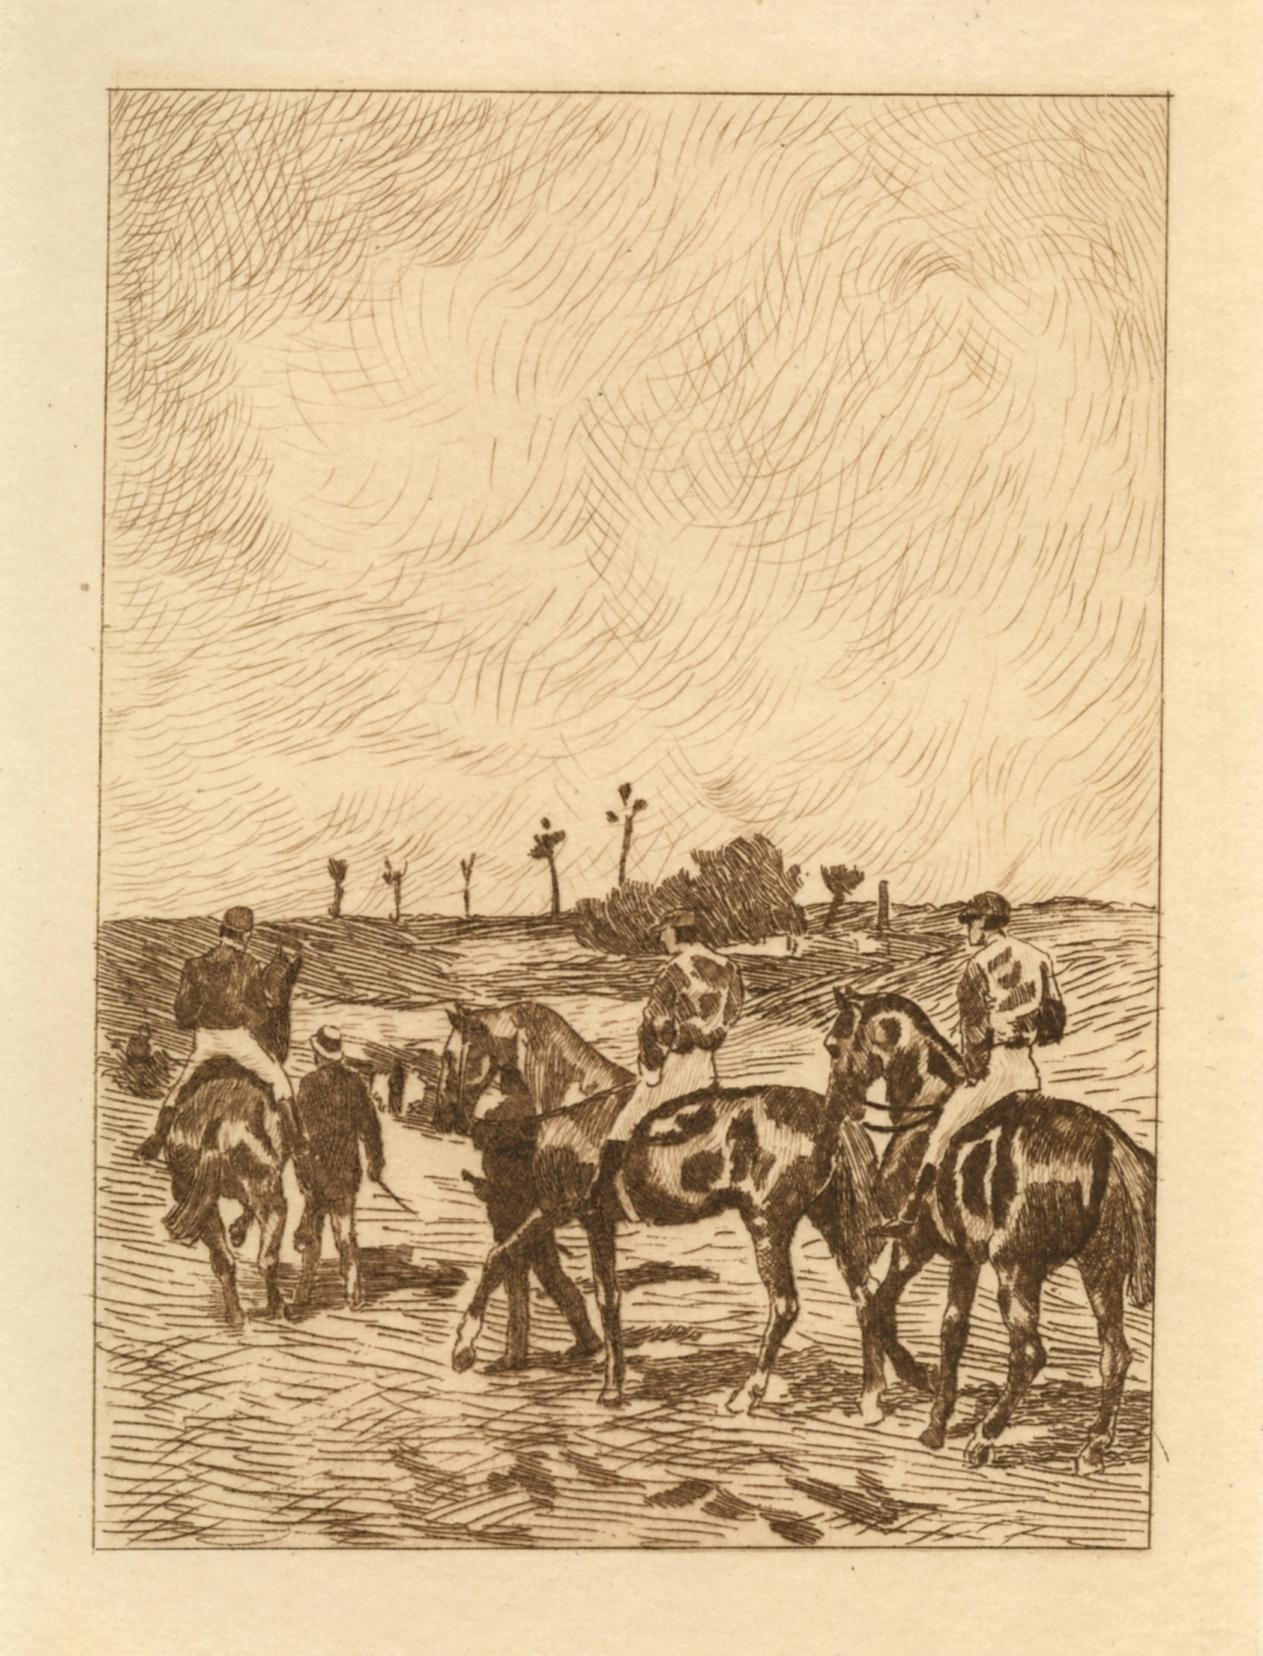 Medium: etching (after the painting). This beautiful piece was etched by Auguste Lauzet after John Lewis Brown, and published in Paris in 1892 by Chamerot et Renouard, for the very rare volume "L'Art Impressionniste", featuring etchings after